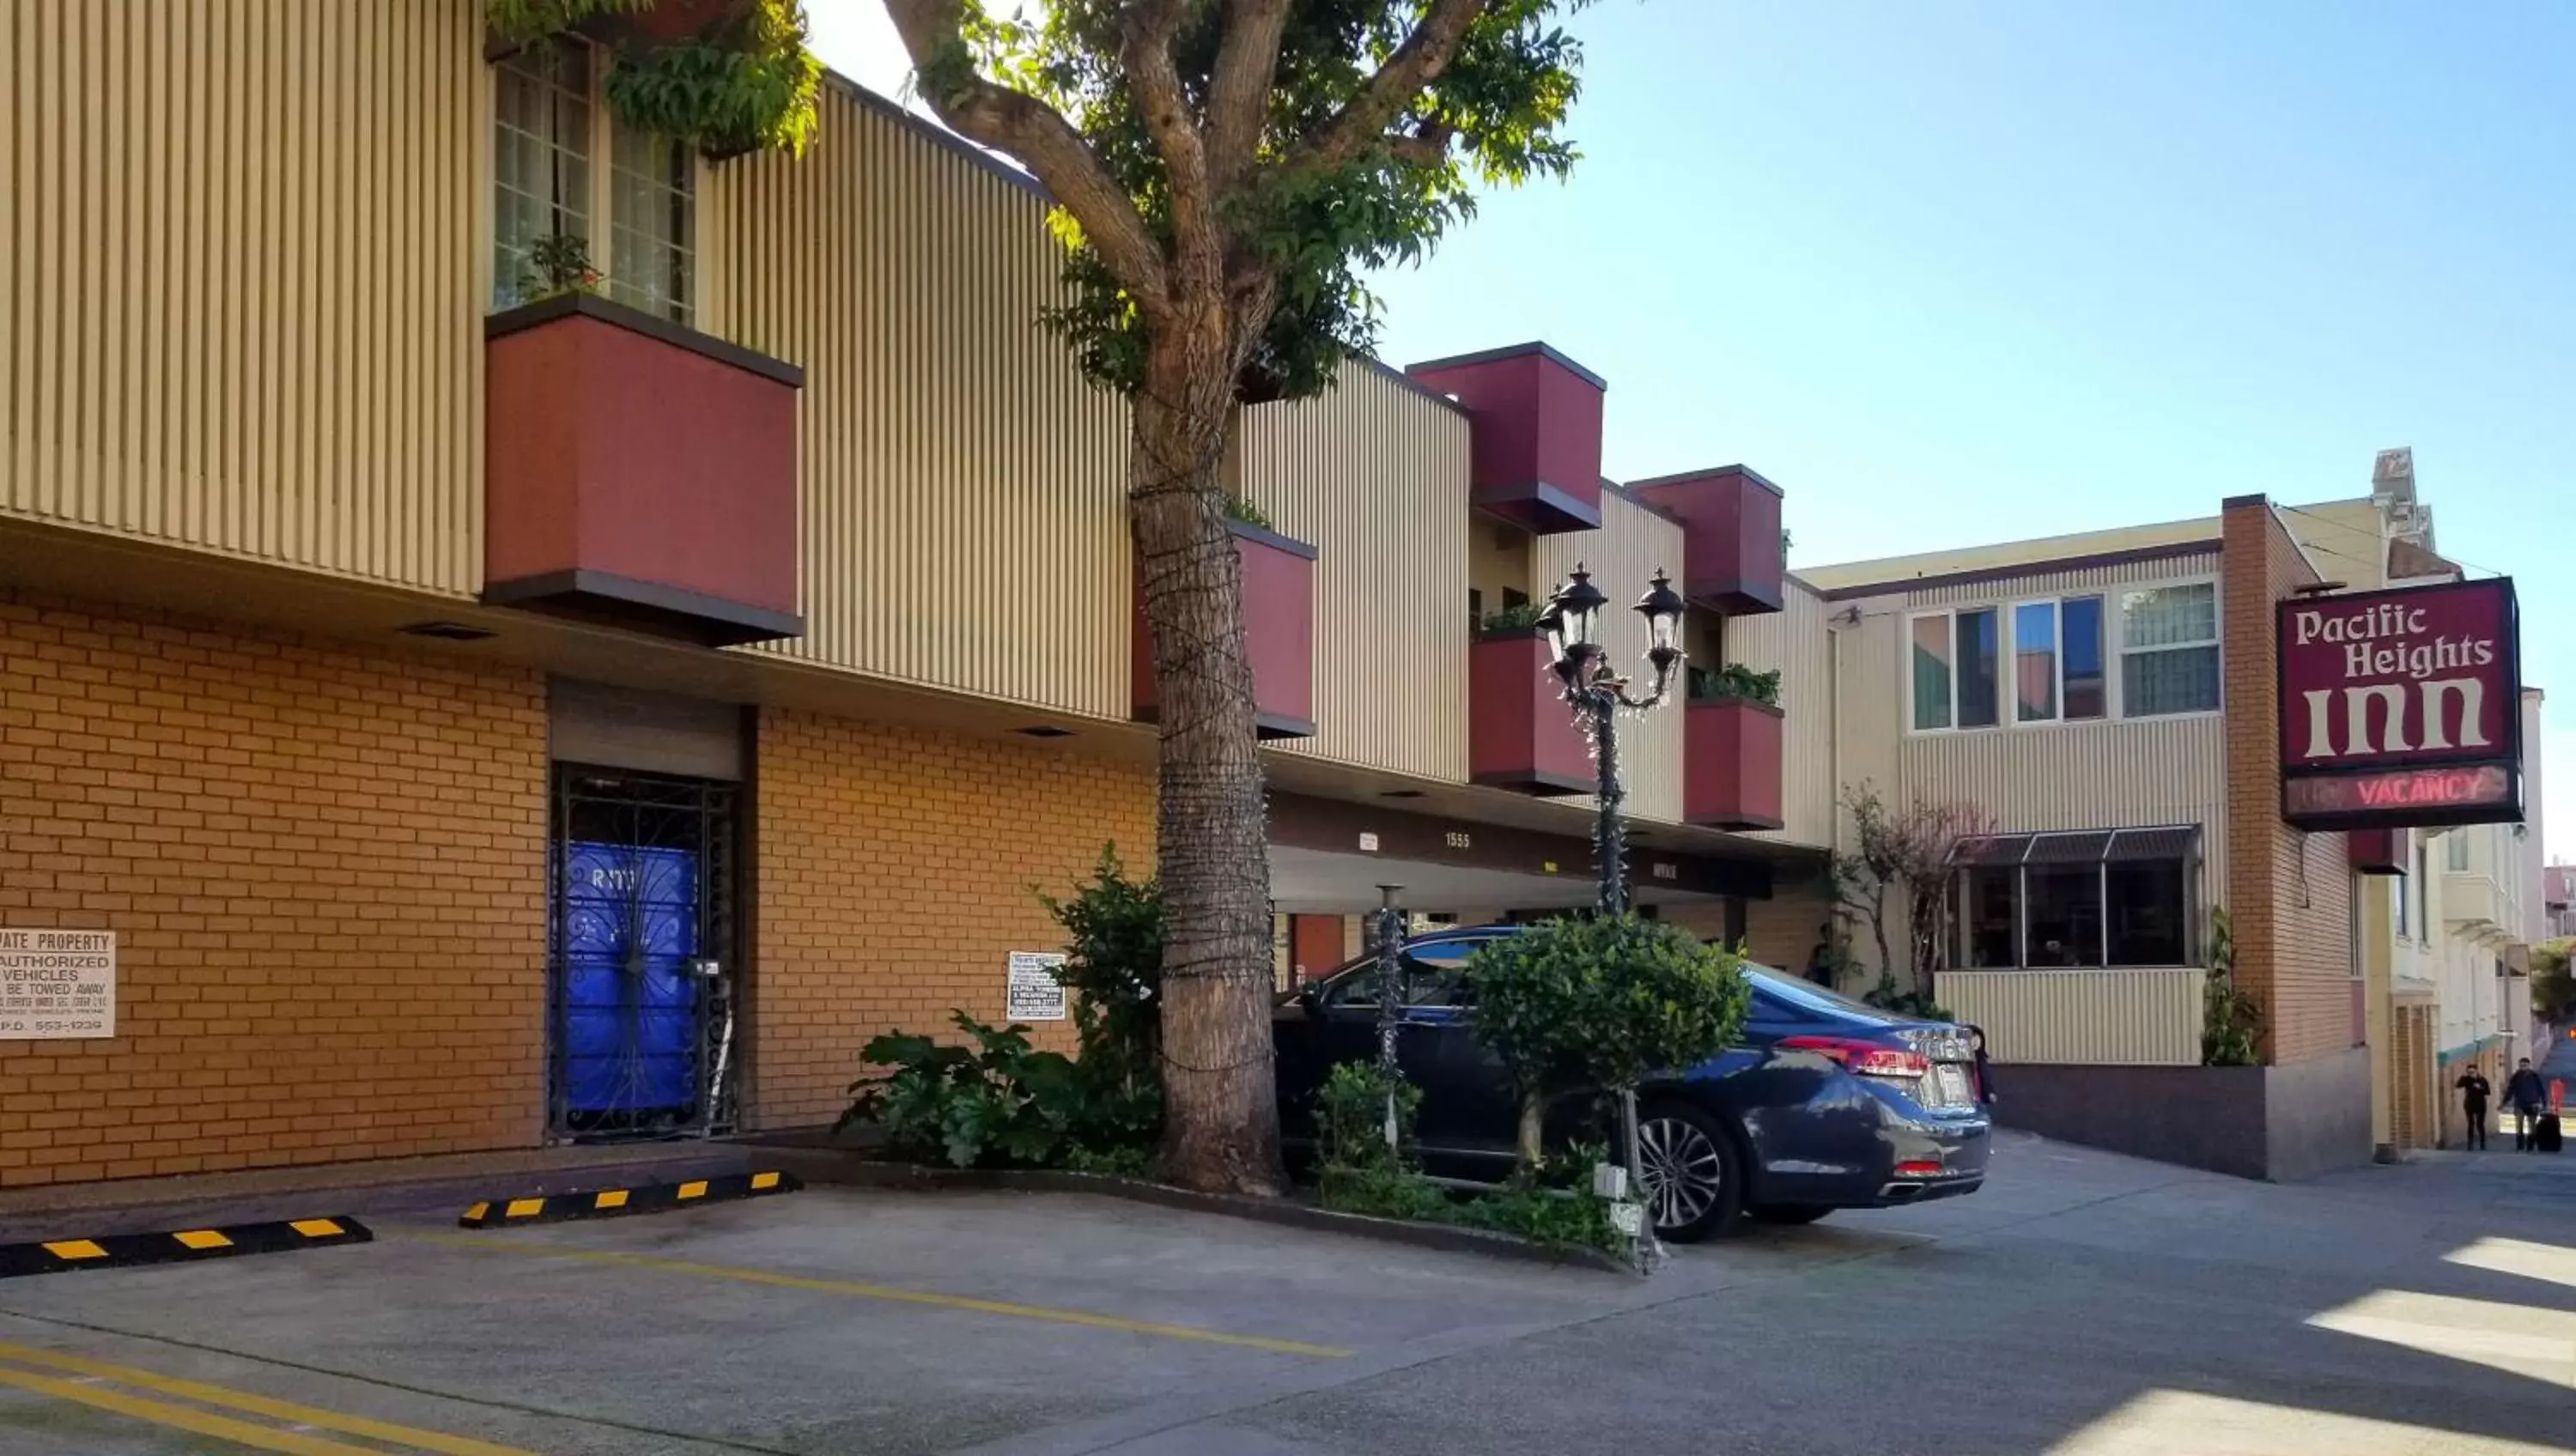 Property building in Pacific Heights Inn